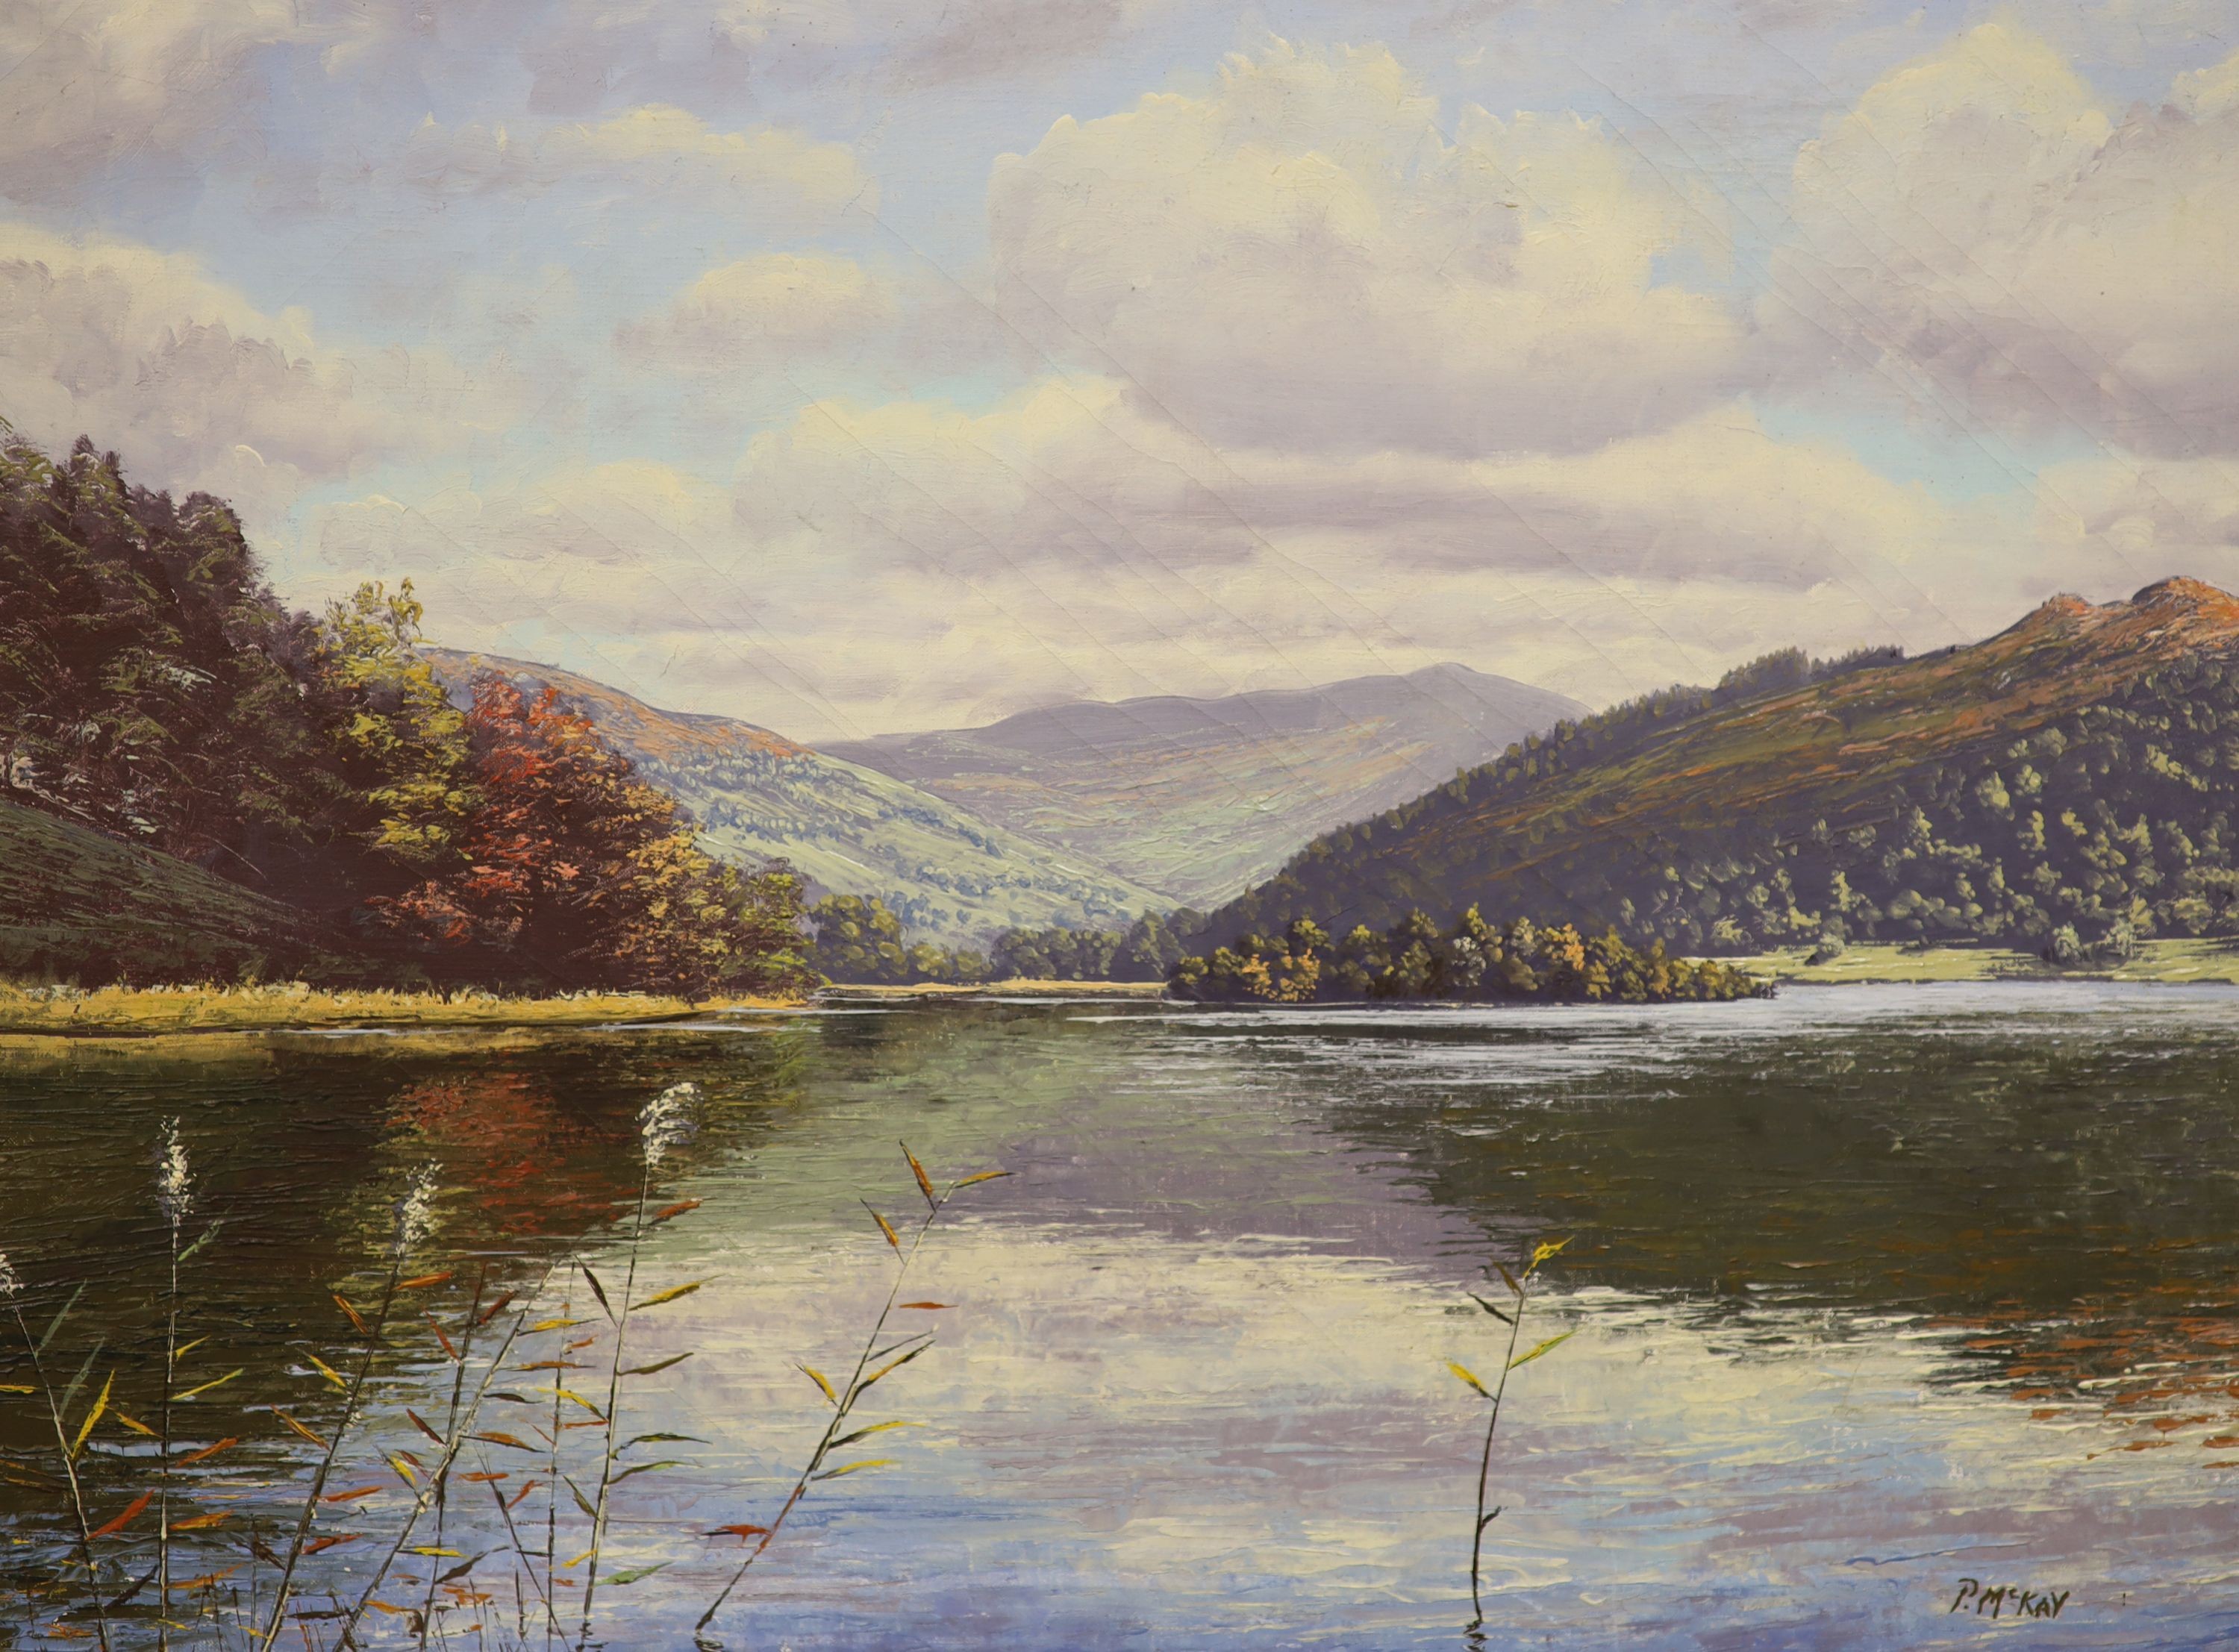 P. McKay, oil on canvas, Rydal Water, signed, 44 x 60cm